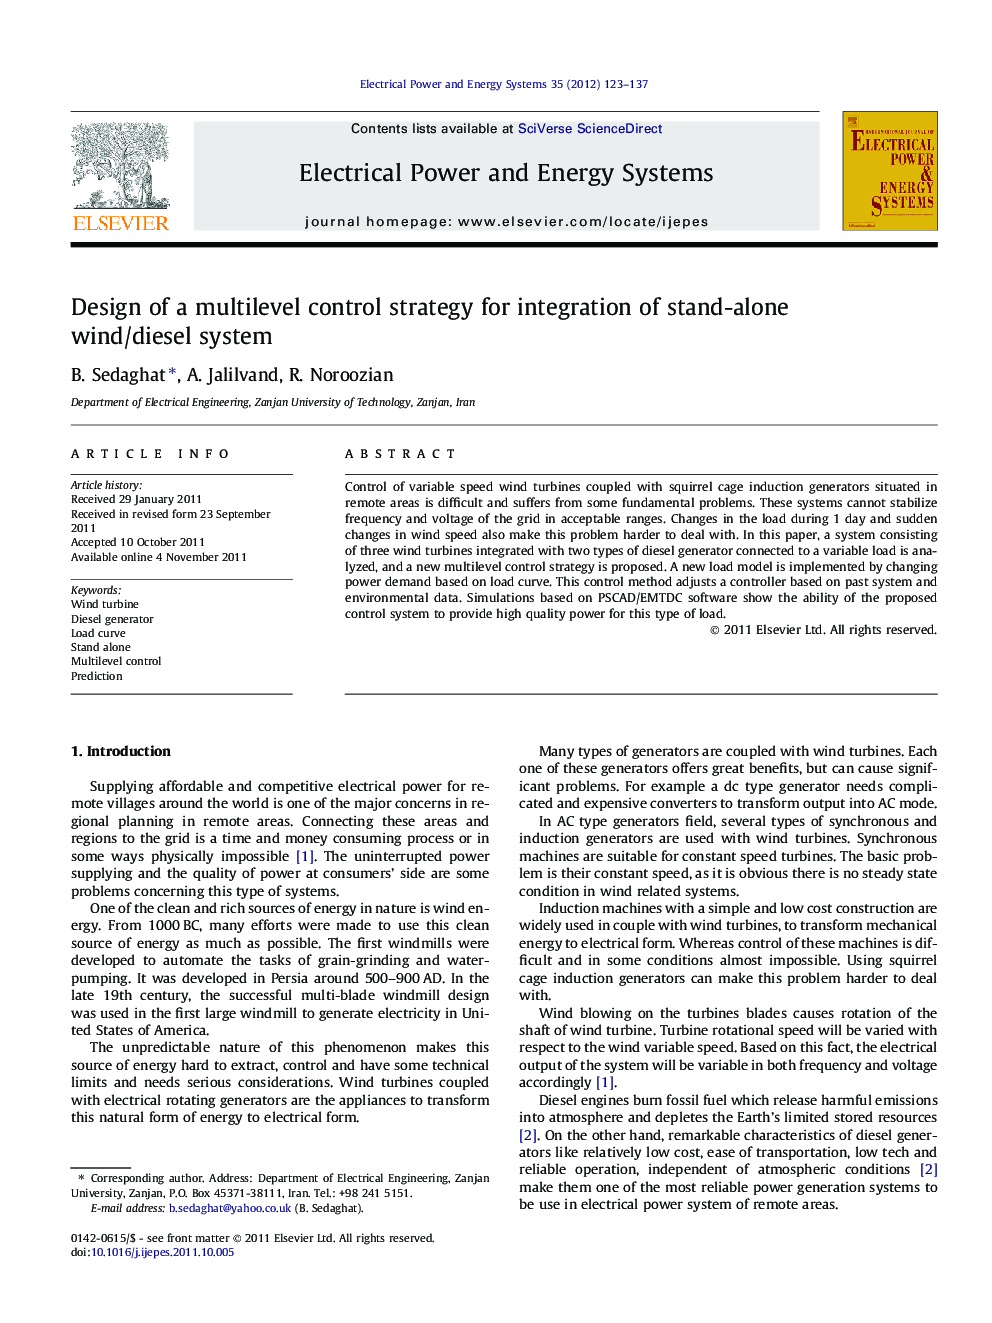 Design of a multilevel control strategy for integration of stand-alone wind/diesel system